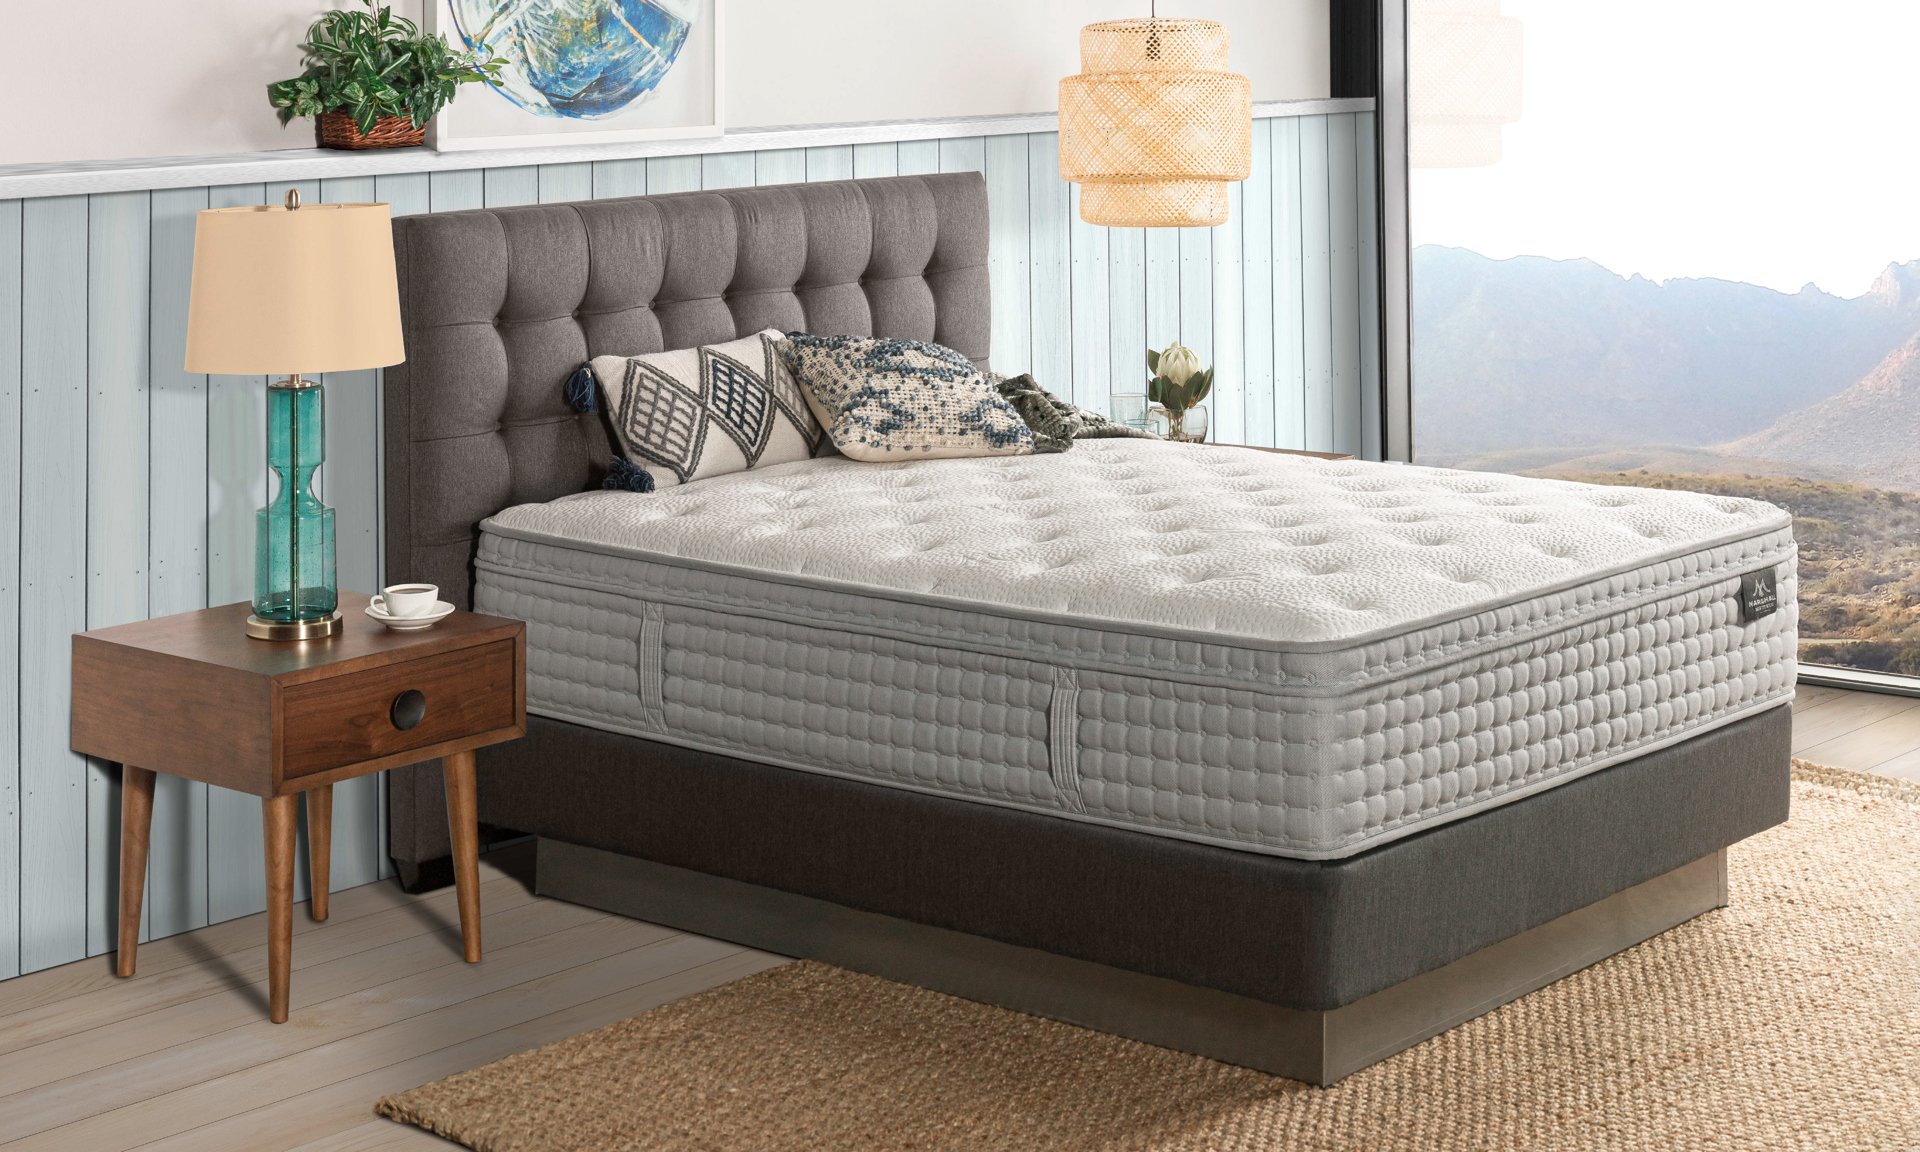 Find the perfect mattress for you by glancing through our selection of mattresses.